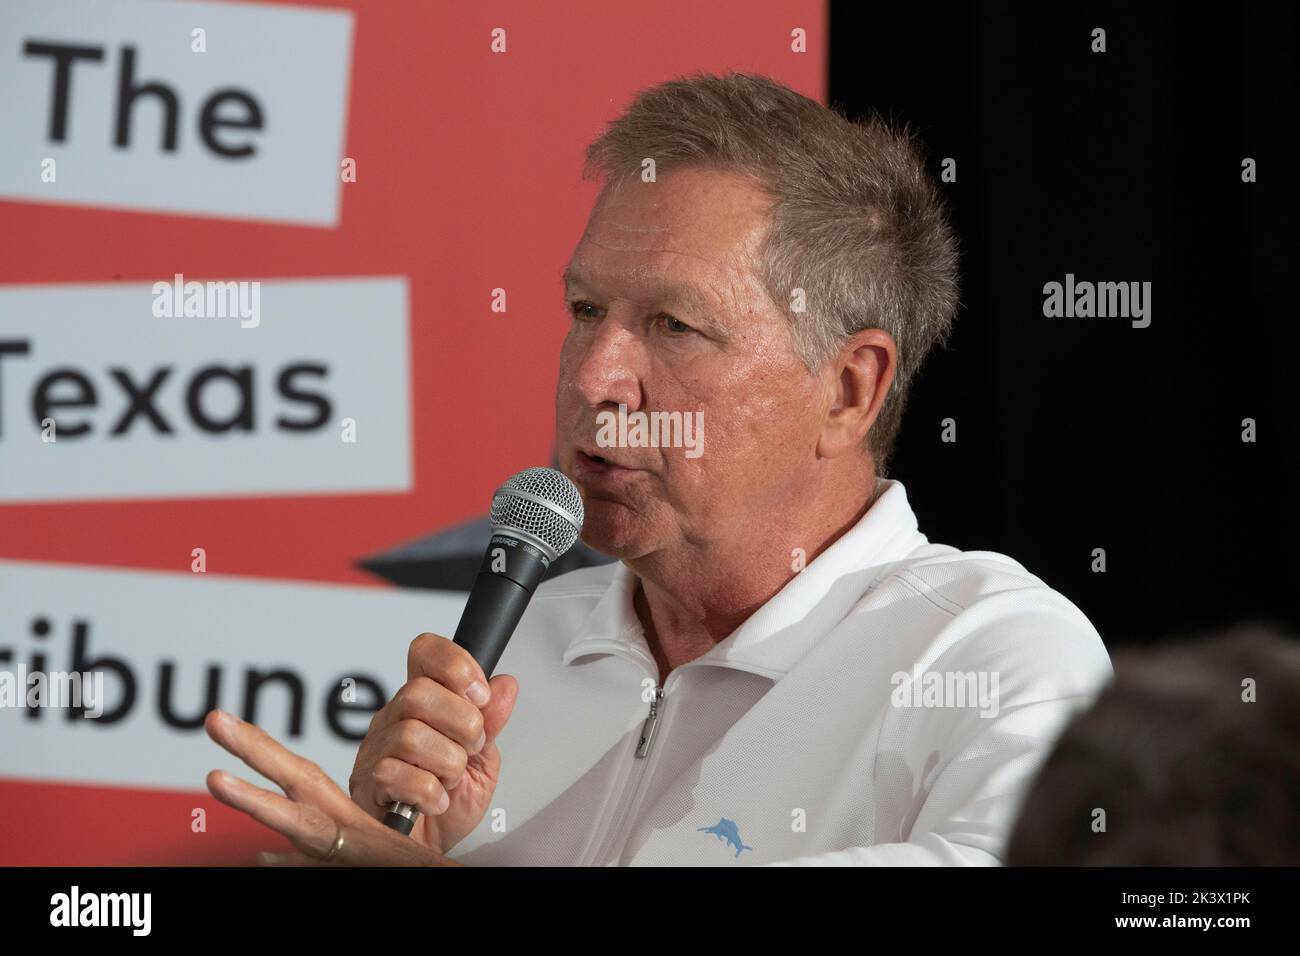 Former governor of Ohio JOHN KASICH leads a panel during an interview session at the annual Texas Tribune Festival in downtown Austin on September 24, 2022.  Kasich ran for president in 2016 in the GOP primary. Stock Photo